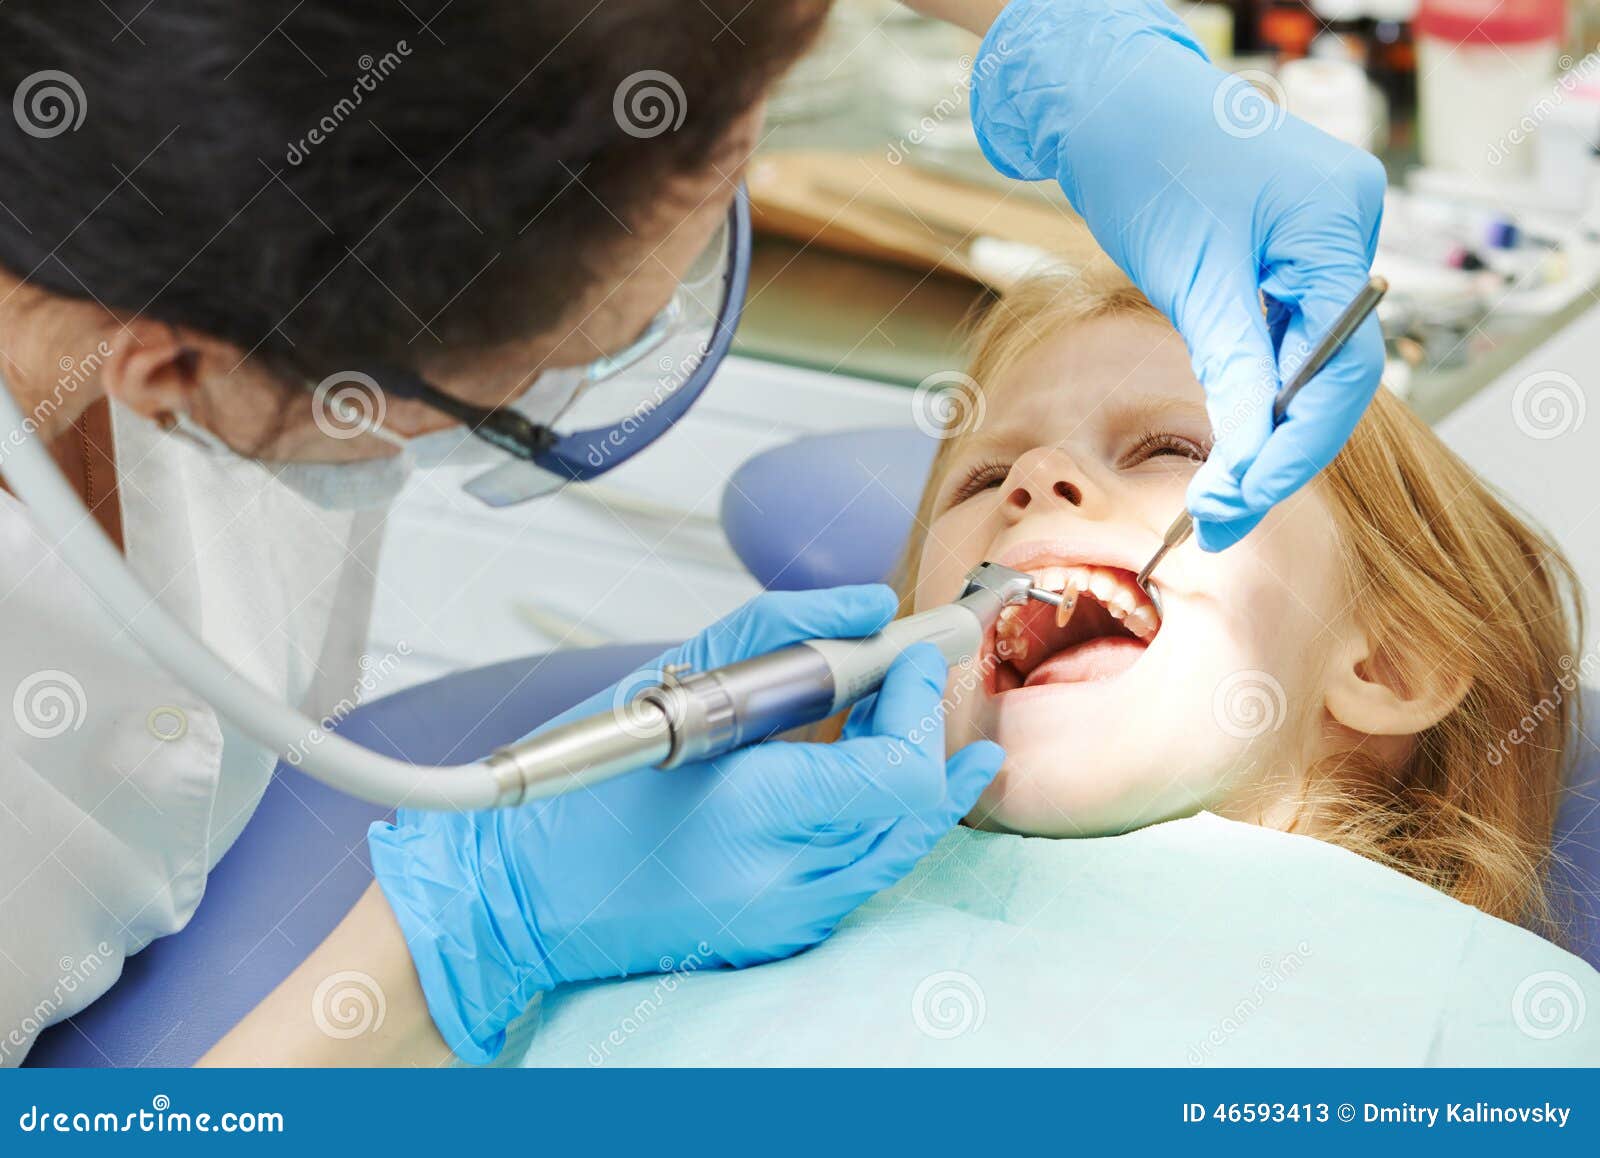 child-dental-care-dentist-orthodontist-female-doctor-making-to-patient-working-place-46593413.jpg